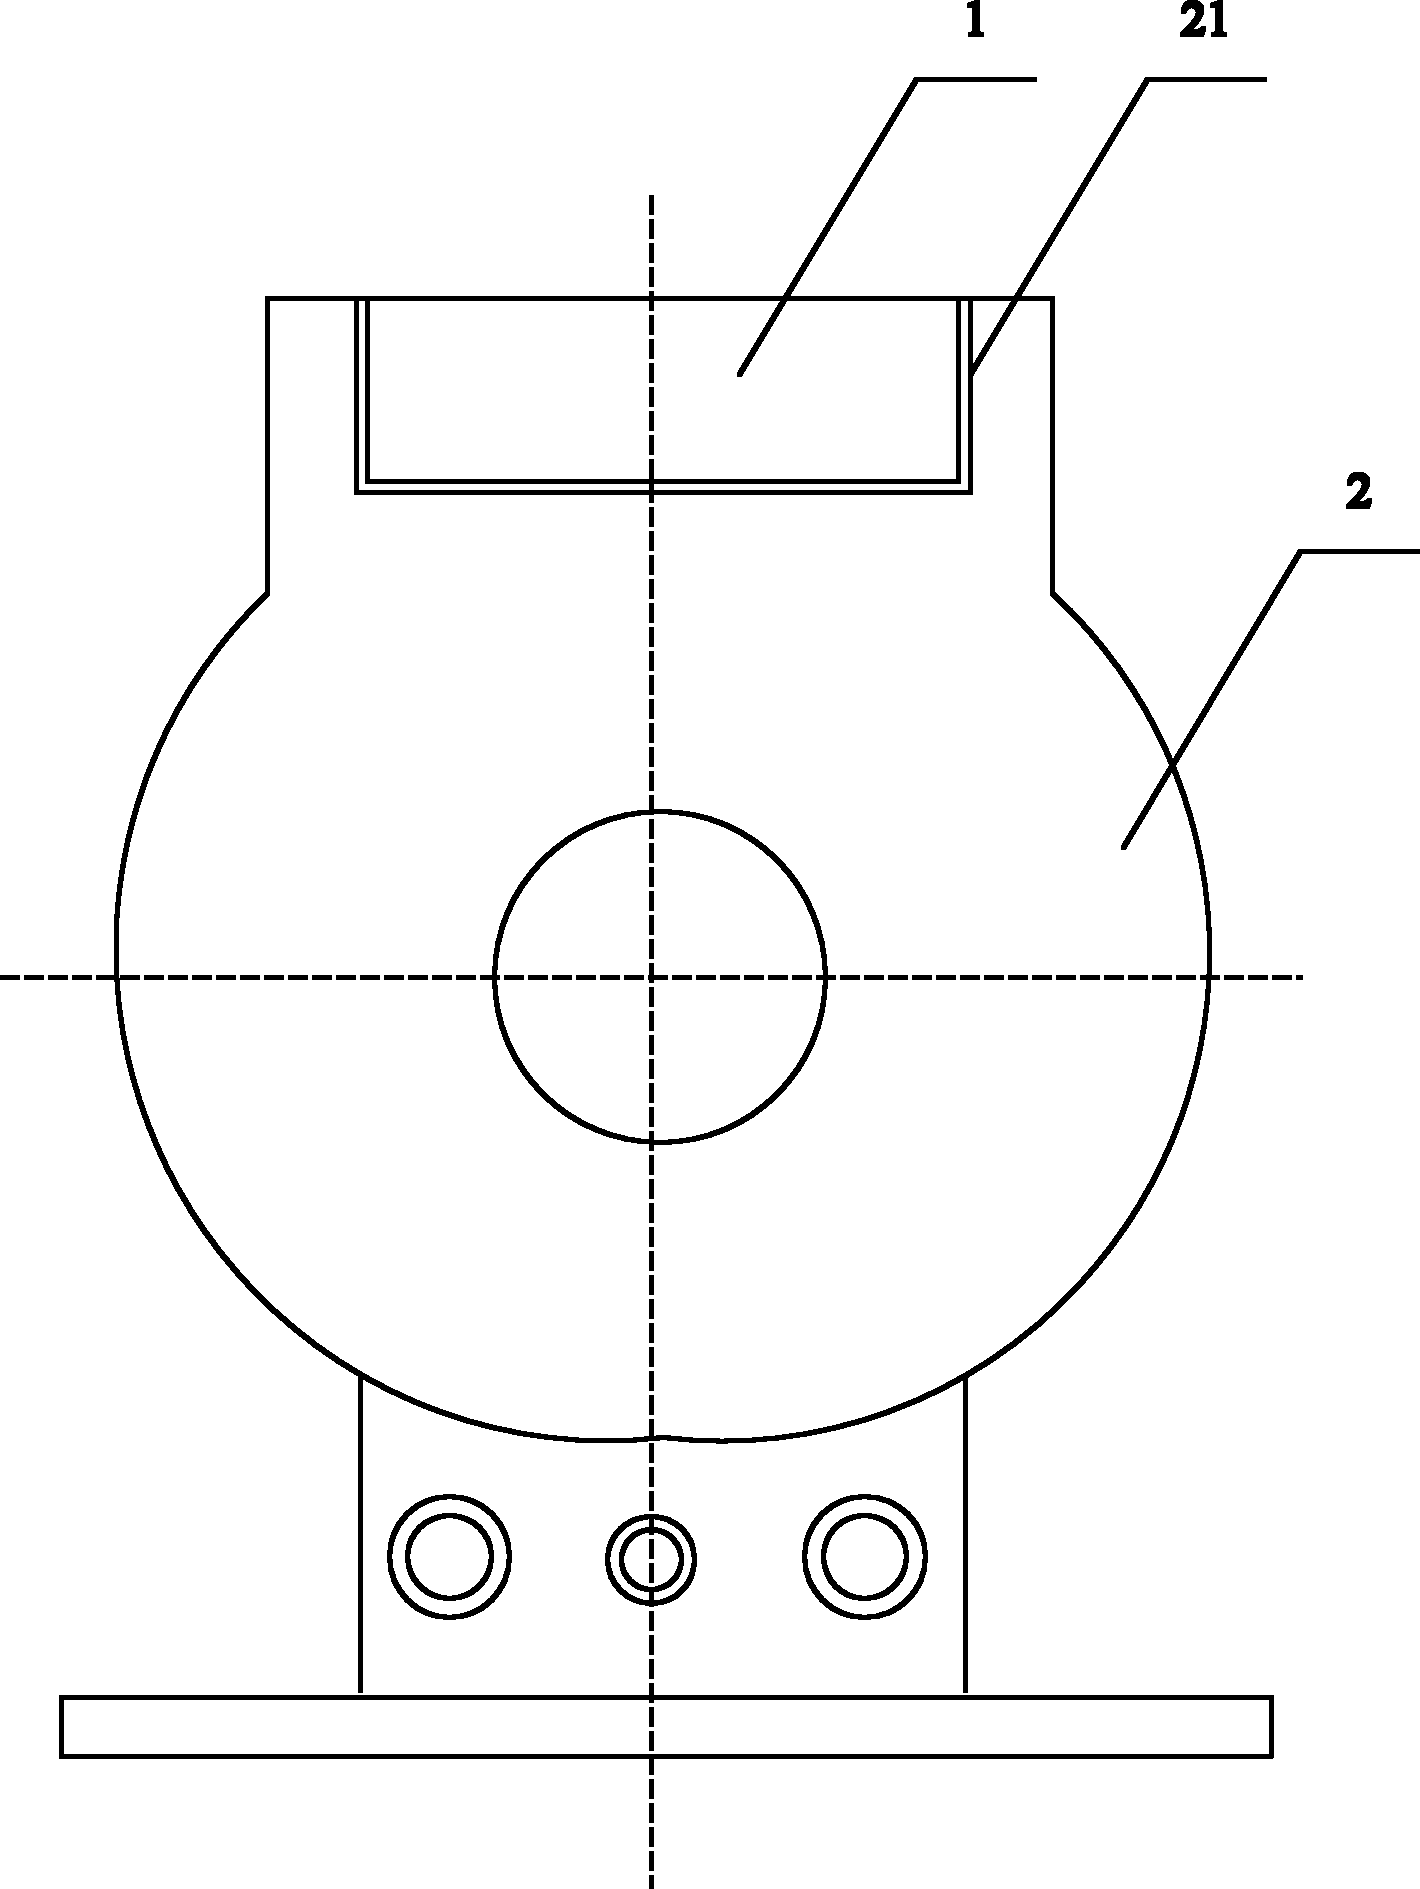 Mutual inductor device